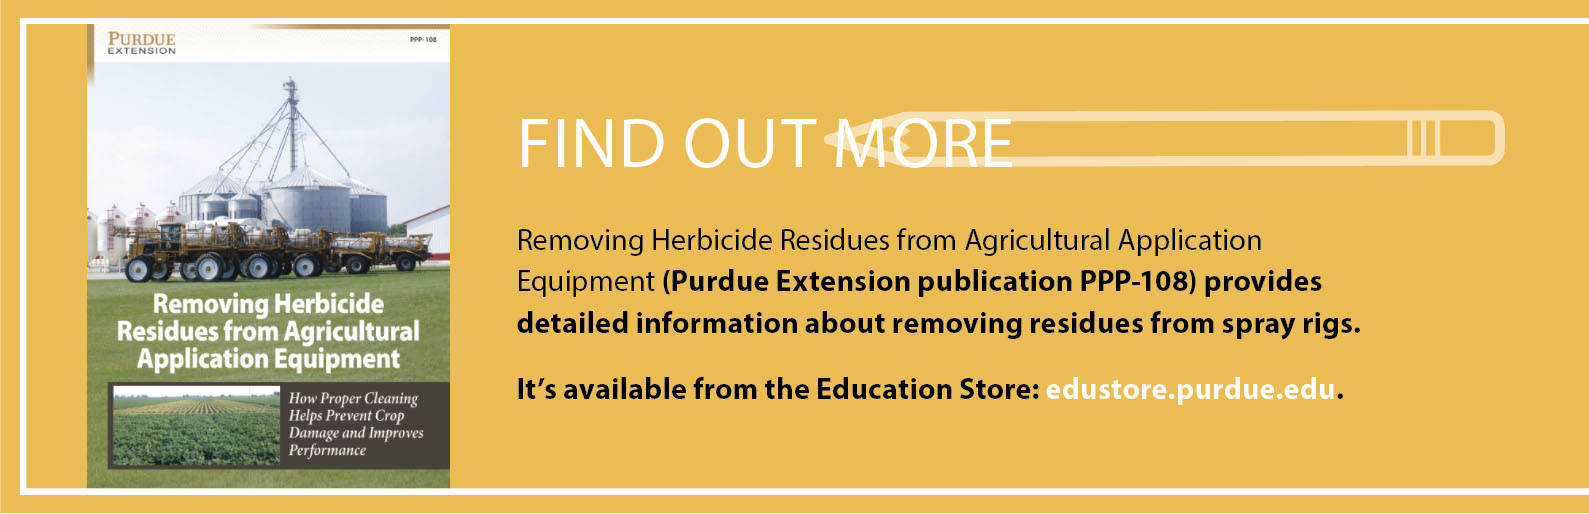 removing-herbicide-find-out-more